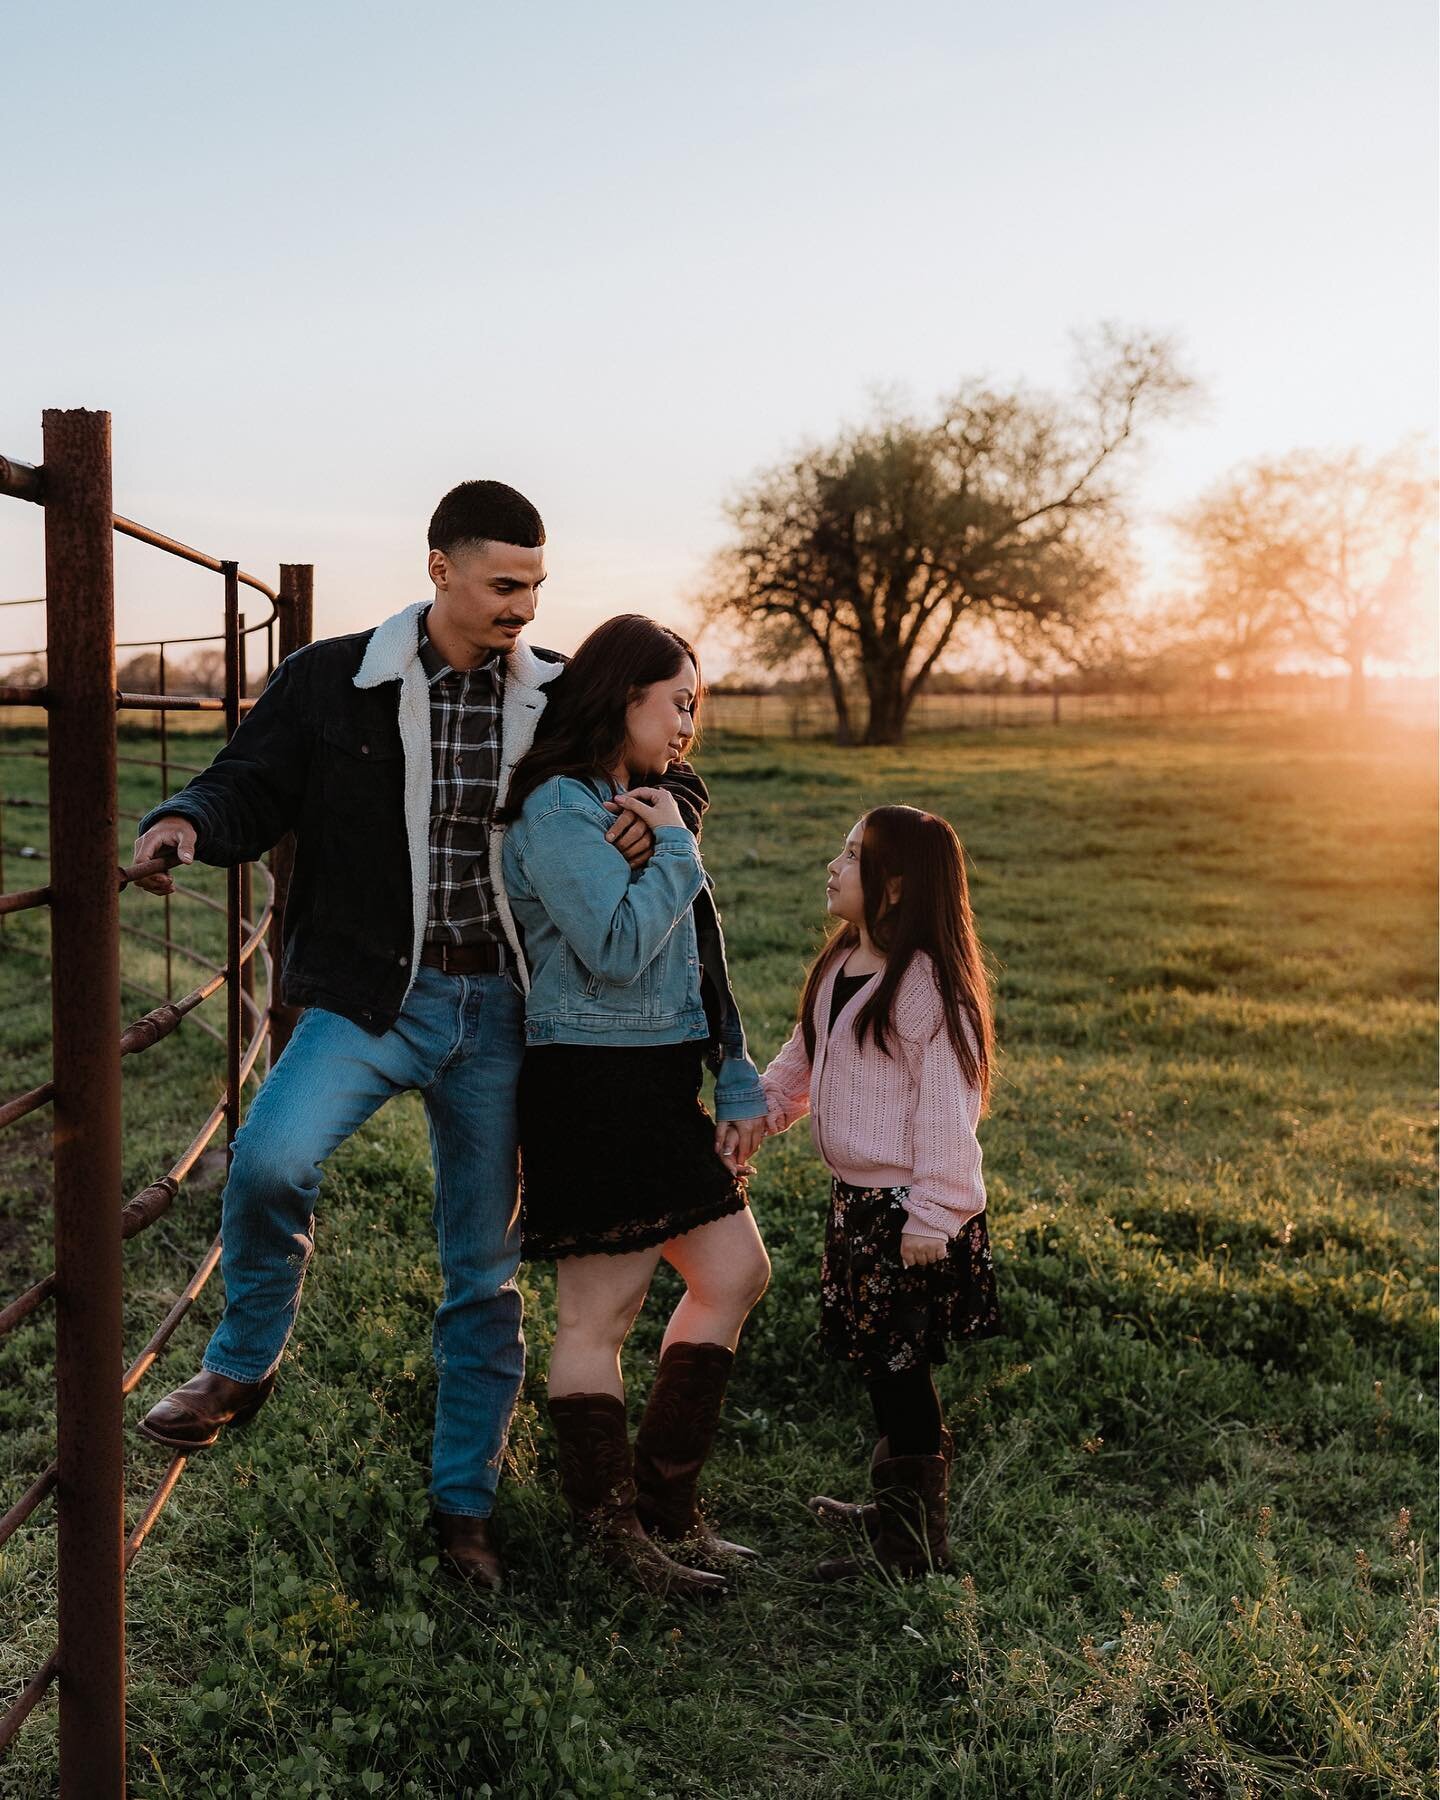 The sweetest family session on their ranch 🫶🏼🥹

#dfwphotographer #dfwfamilyphotographer #dfwmotherhoodphotographer #familysessionphotographer